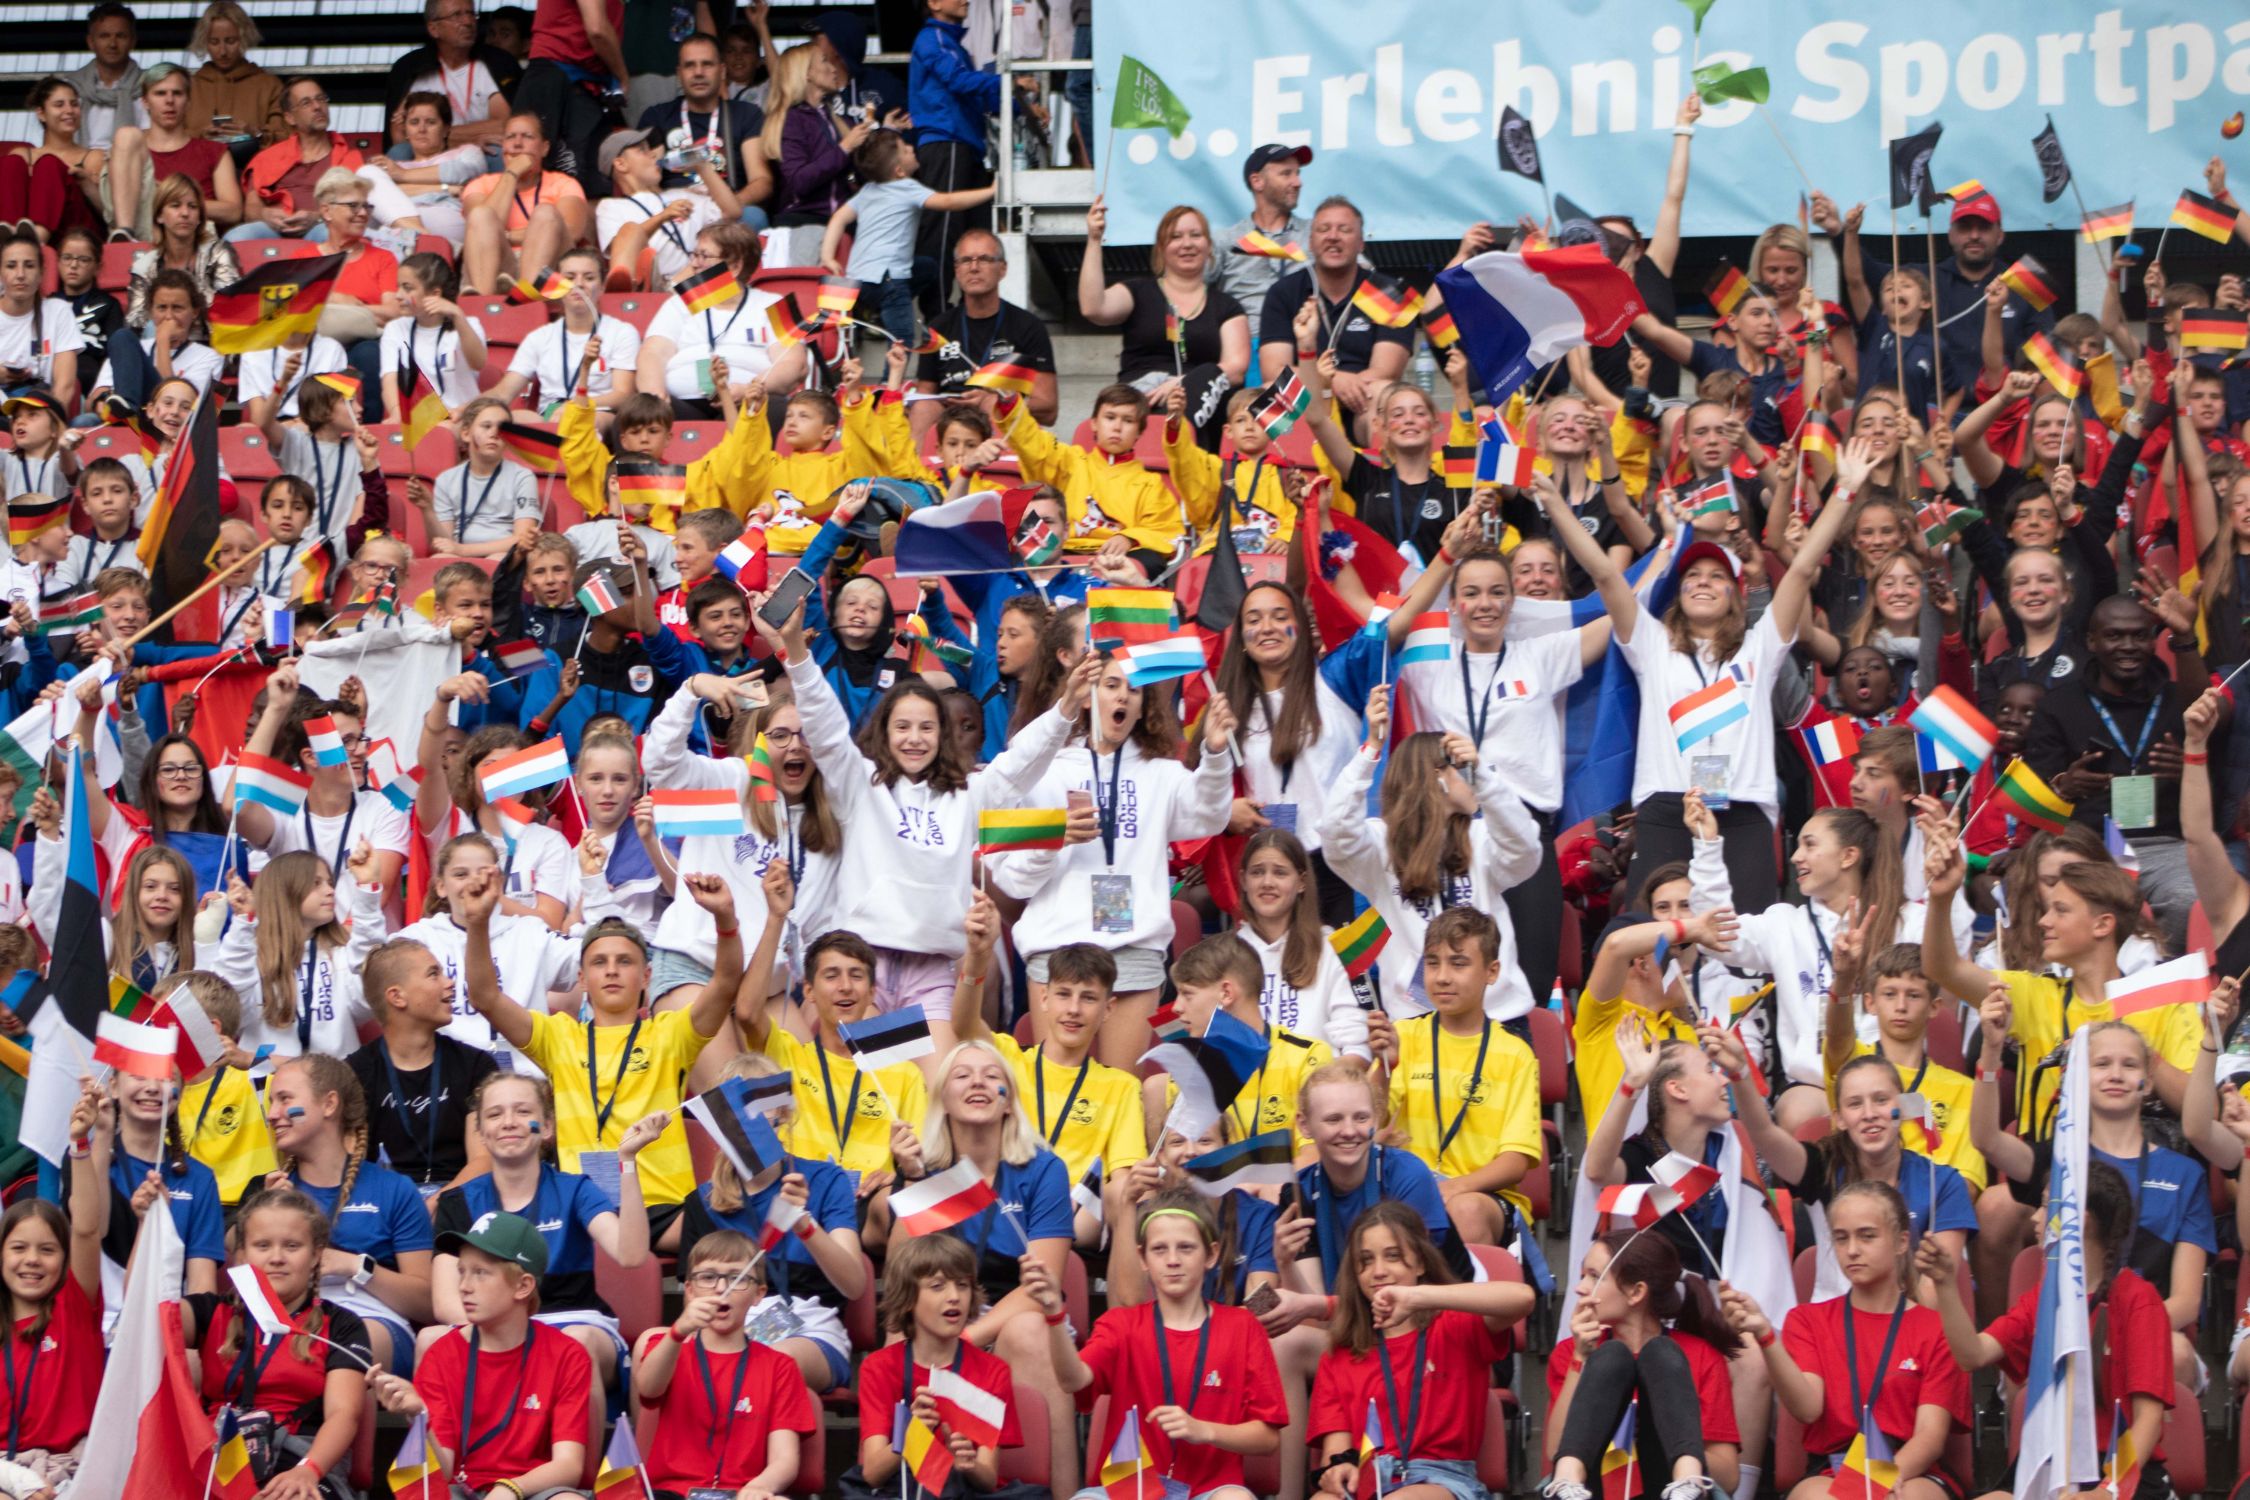 Enthusiastic spectators at the United World Games